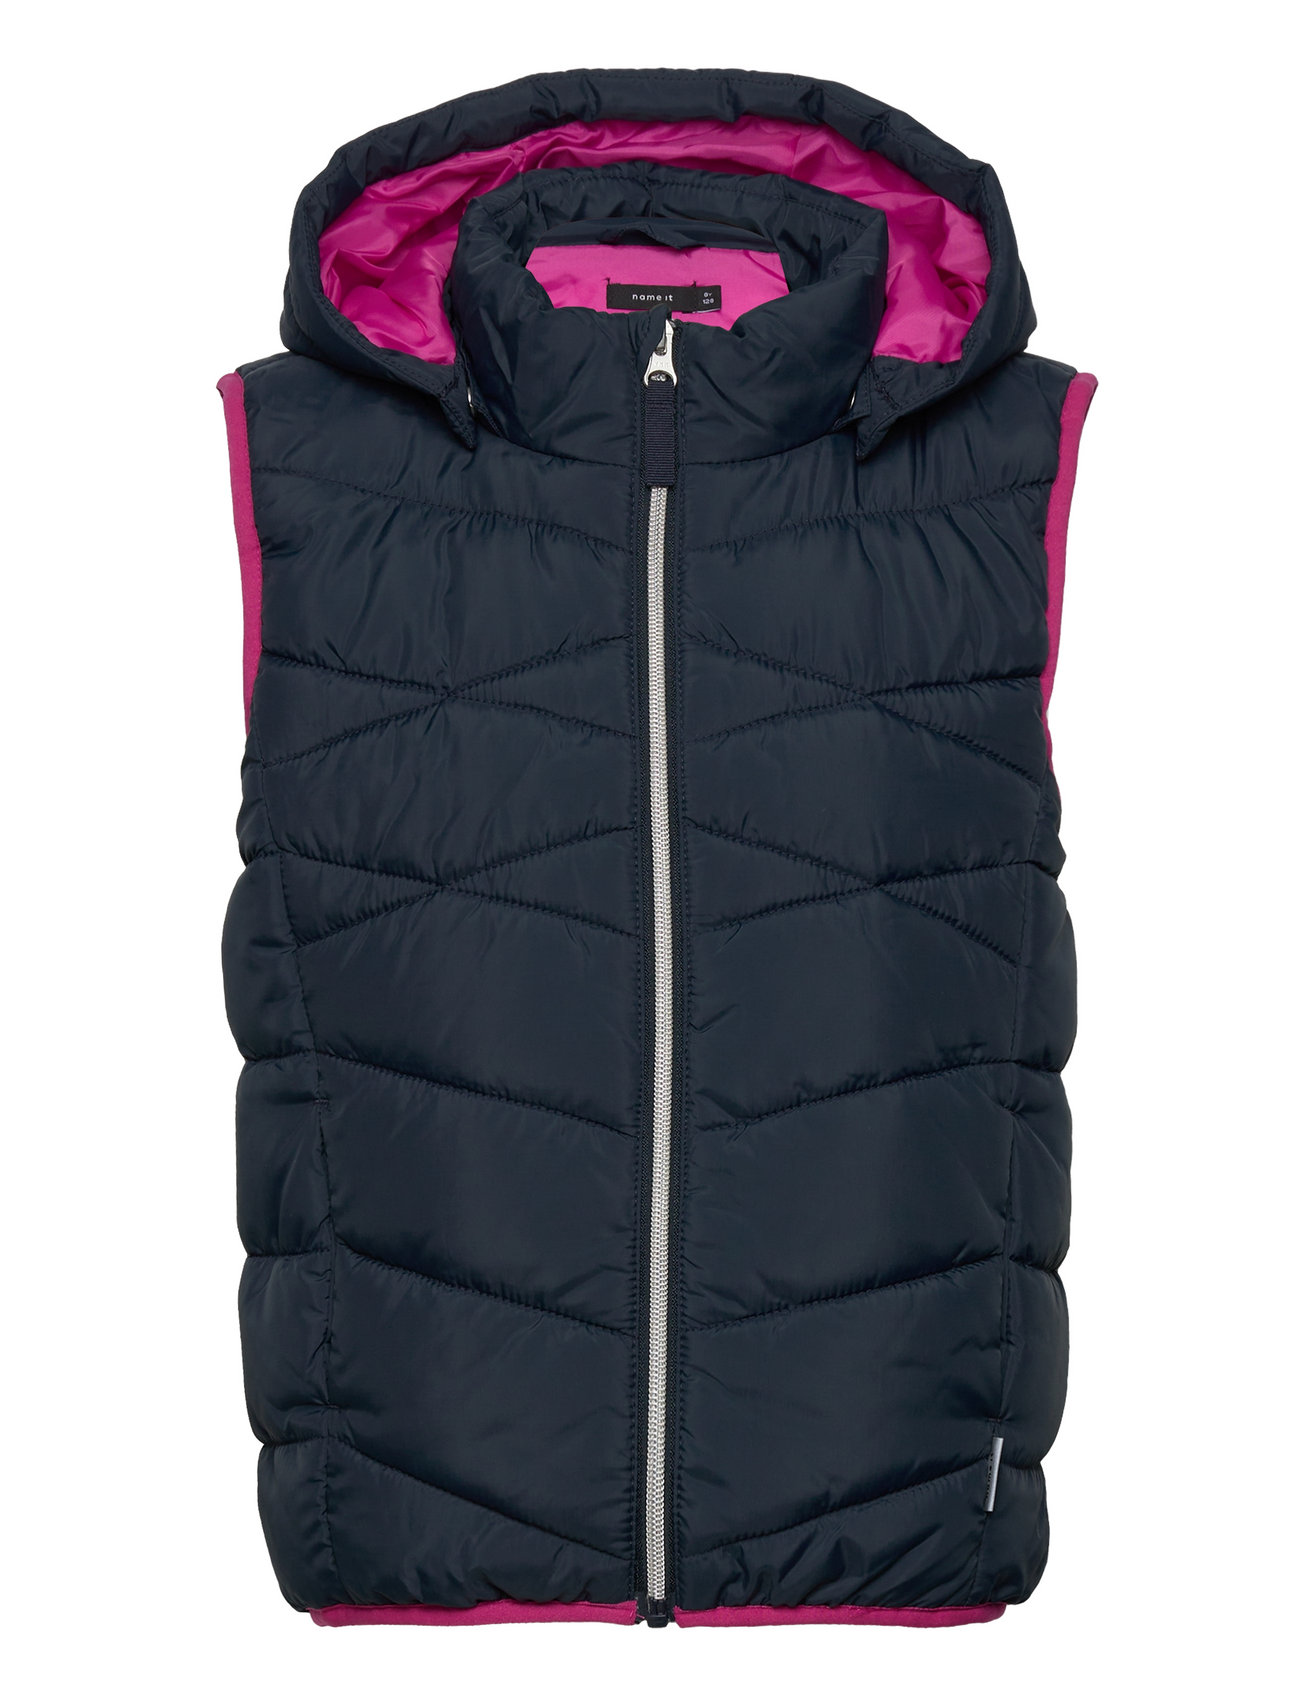 name it Nkfmemphis Vest Pb - 15.00 €. Buy Vests from name it online at  Boozt.com. Fast delivery and easy returns